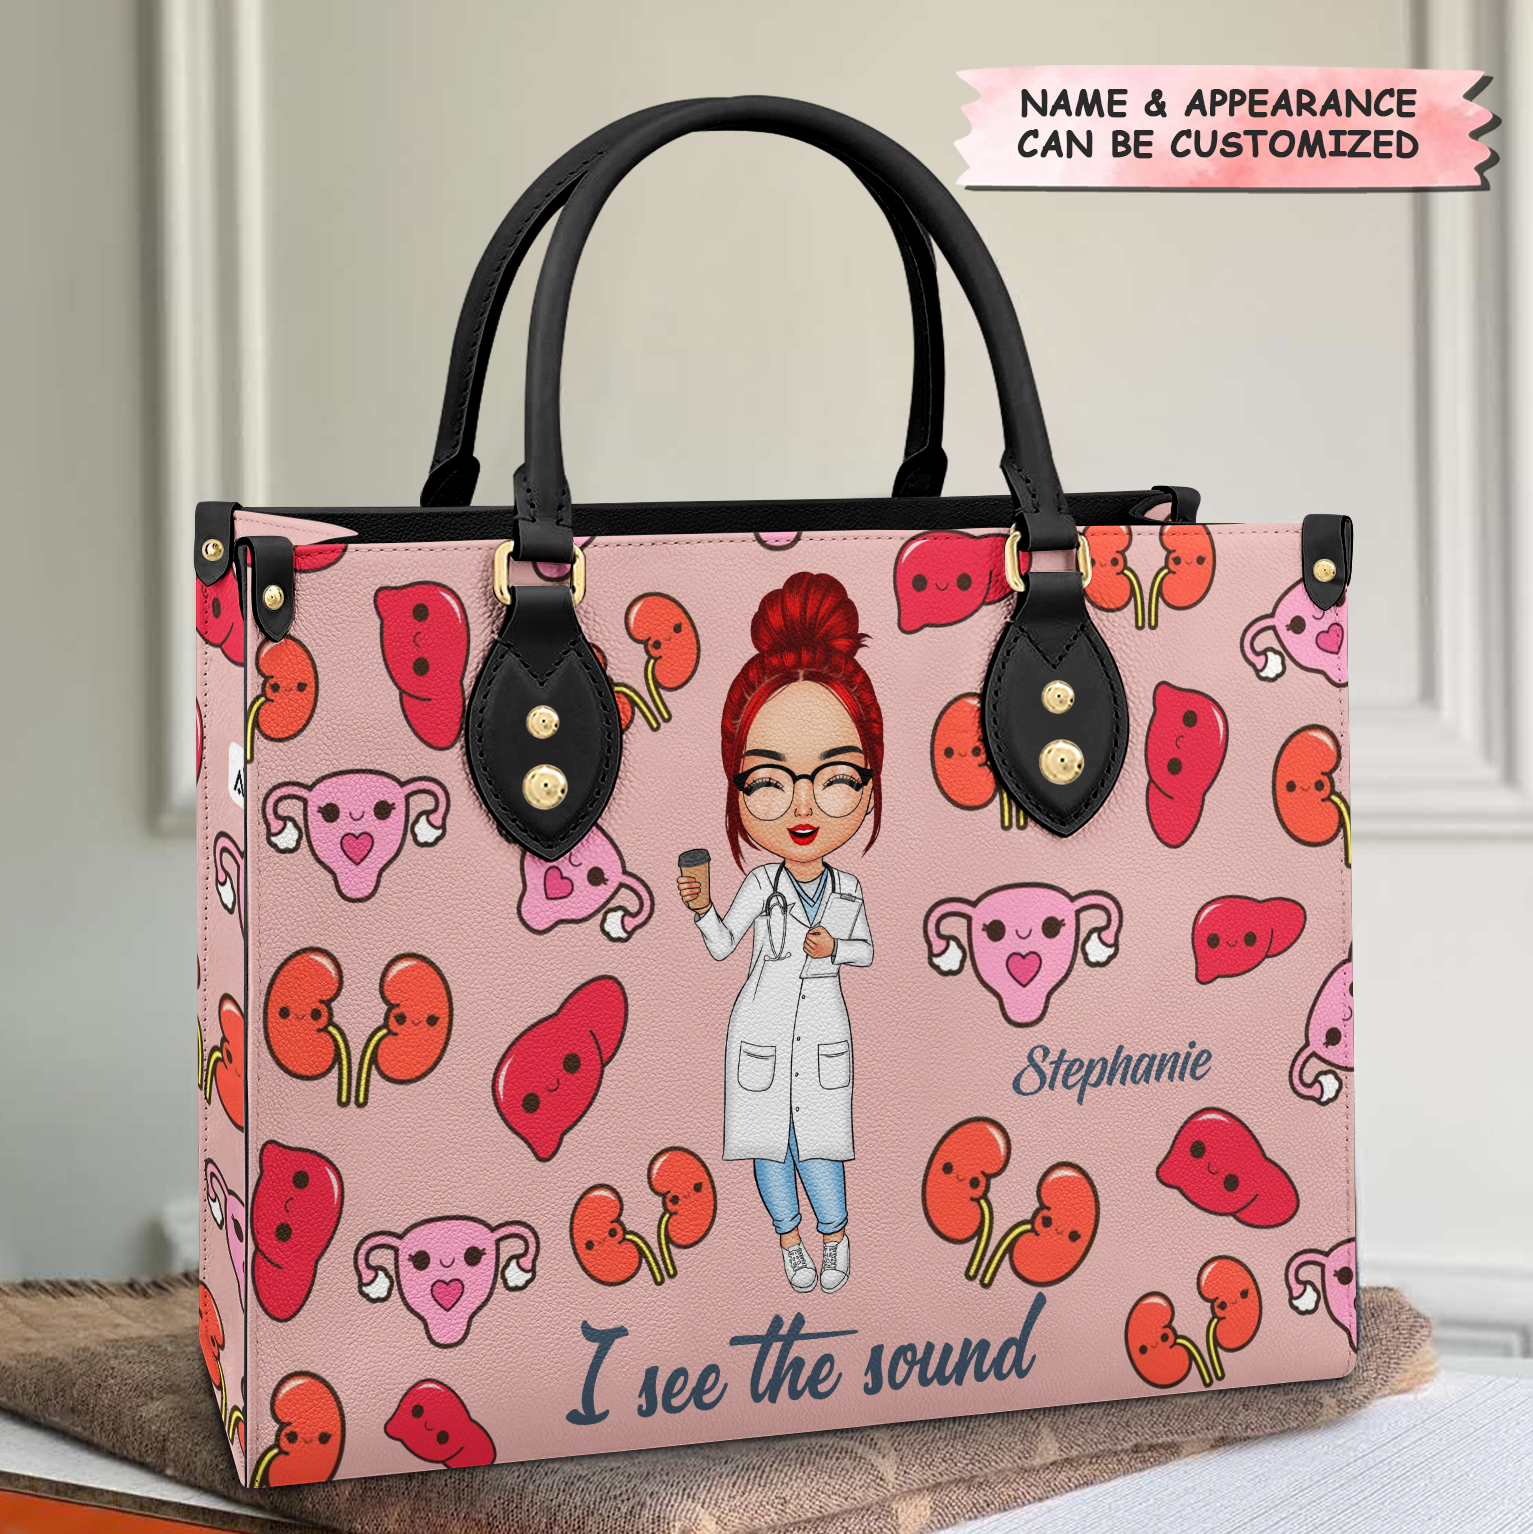 Personalized Leather Bag - Gift For Ultrasound Tech - I See The Sound